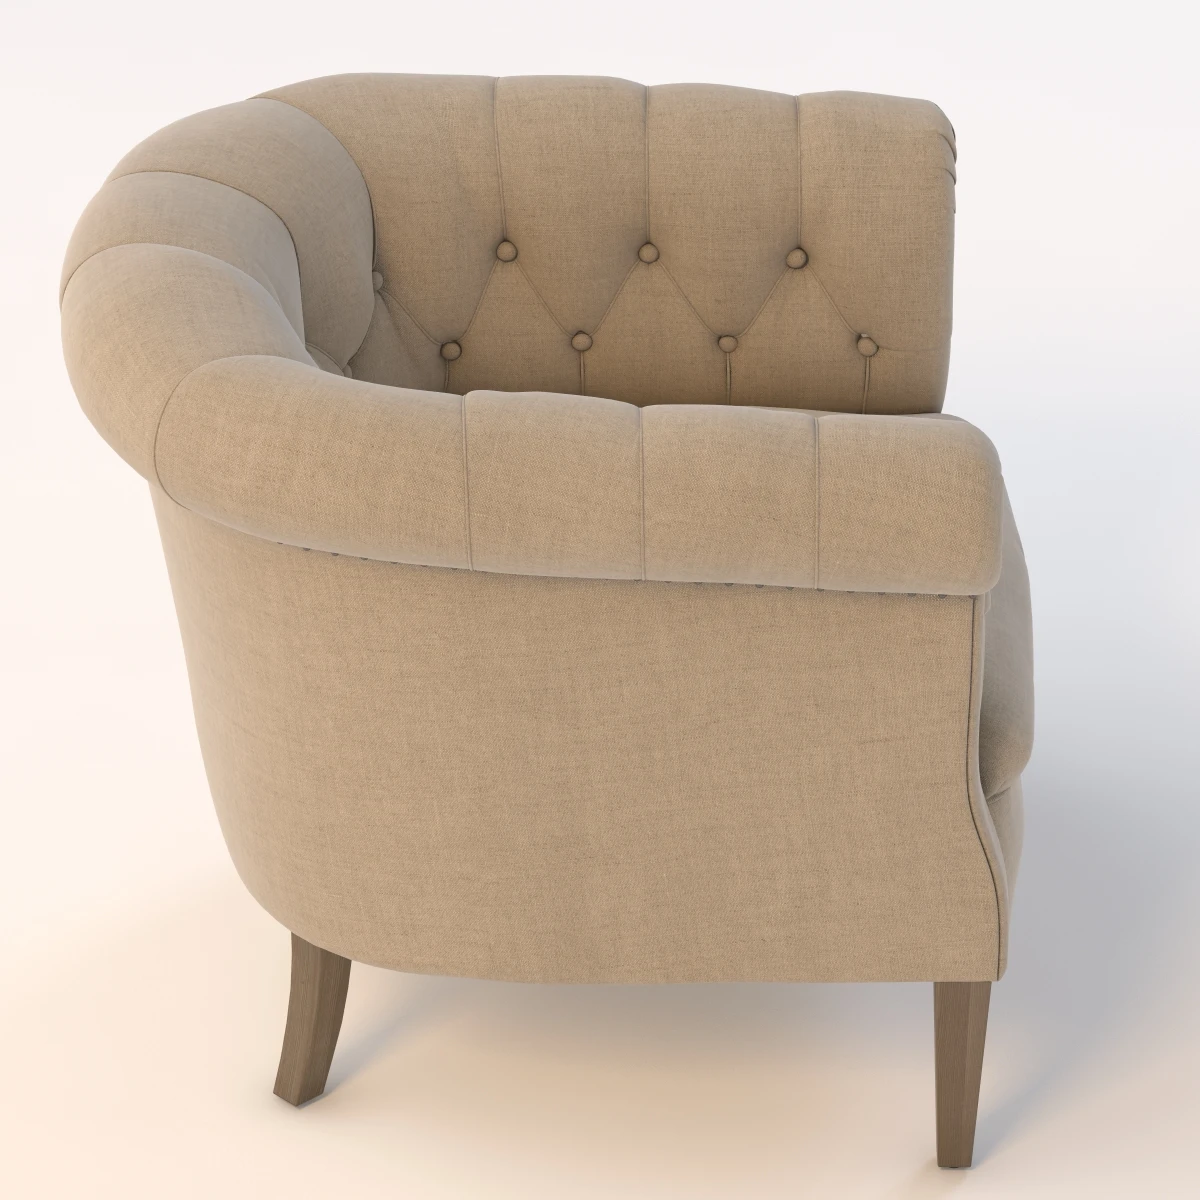 1930S English Tufted Upholstered Tub Chair 3D Model_03